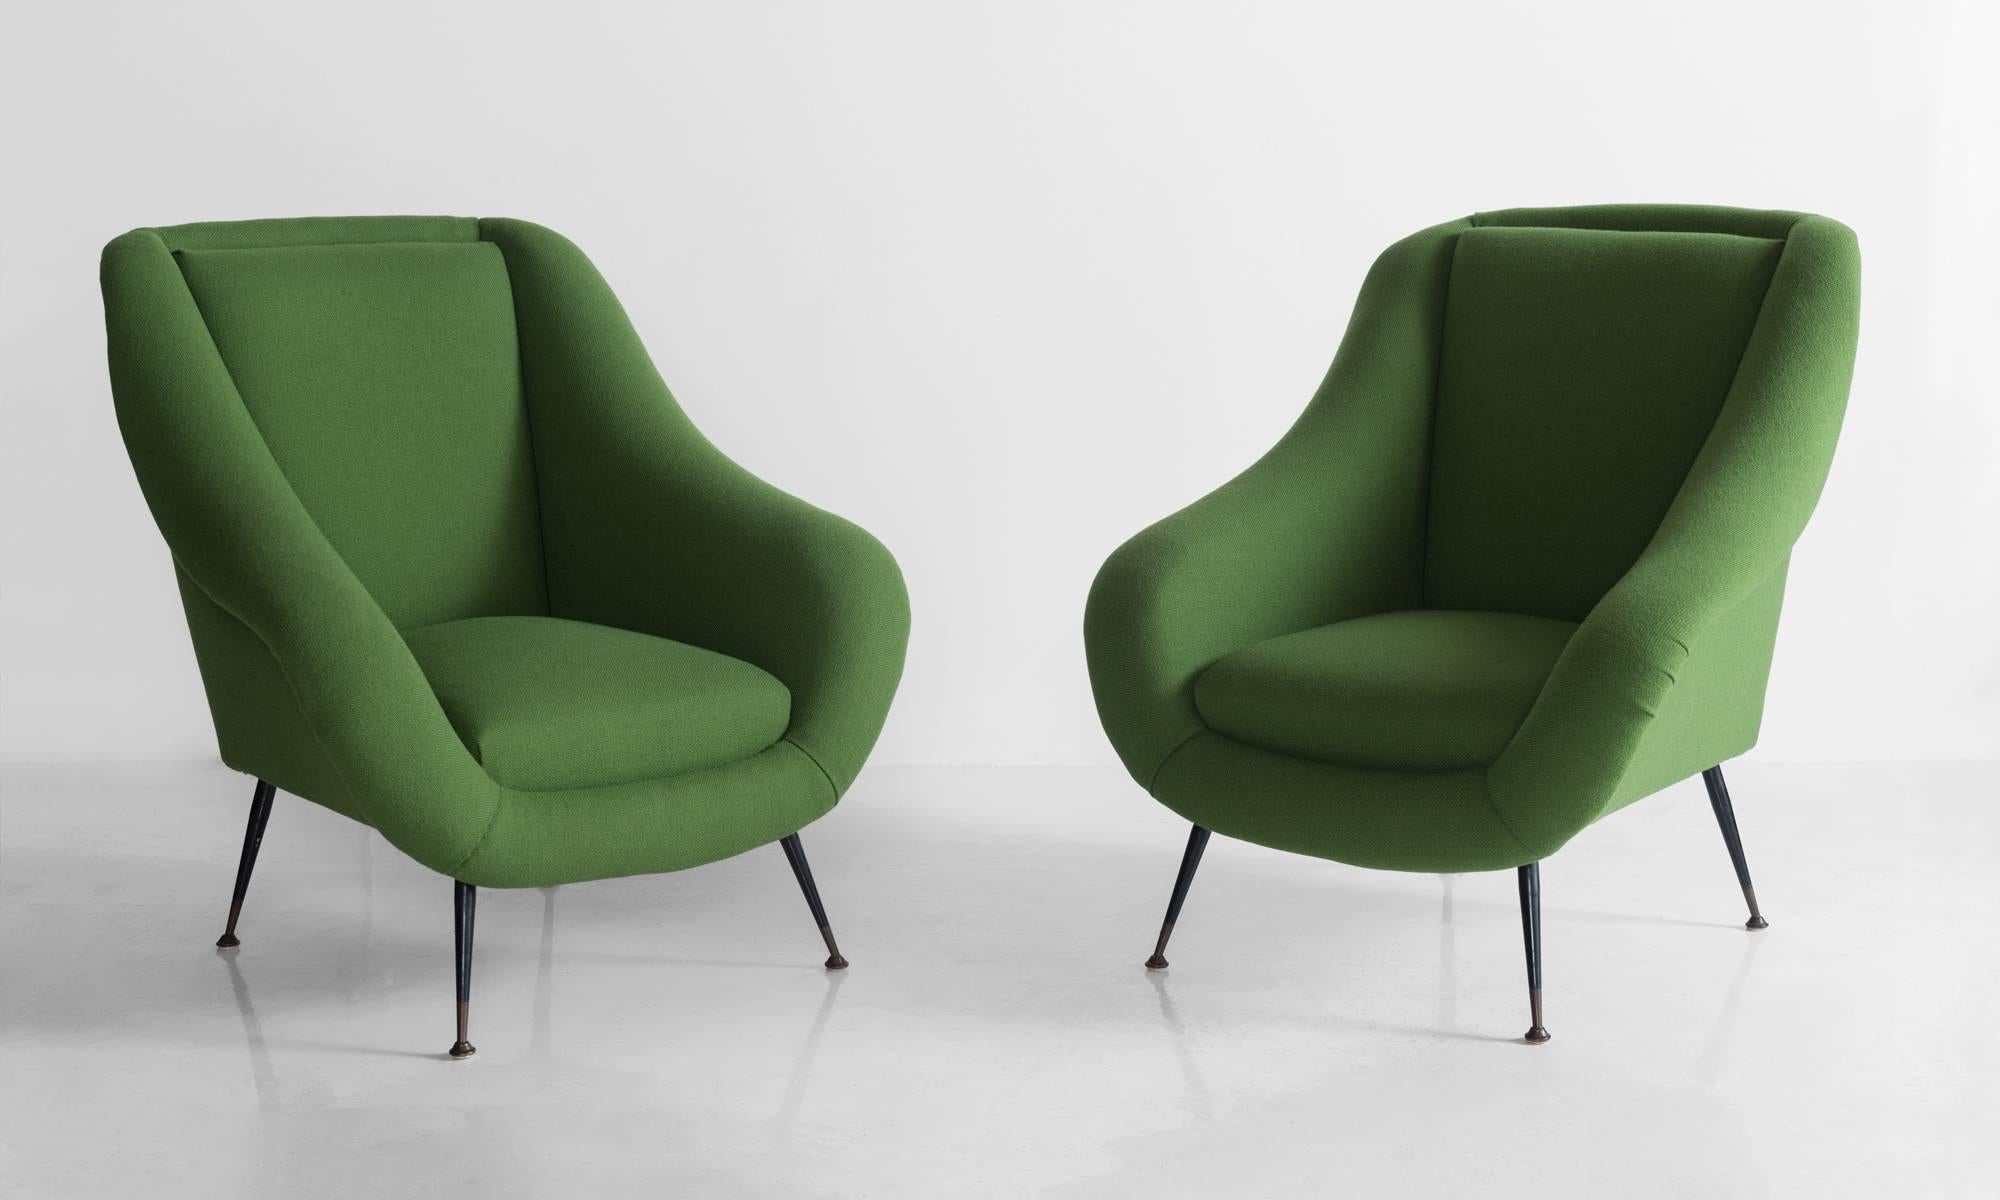 Handsome armchairs, newly reupholstered in green wool by Kvadrat.